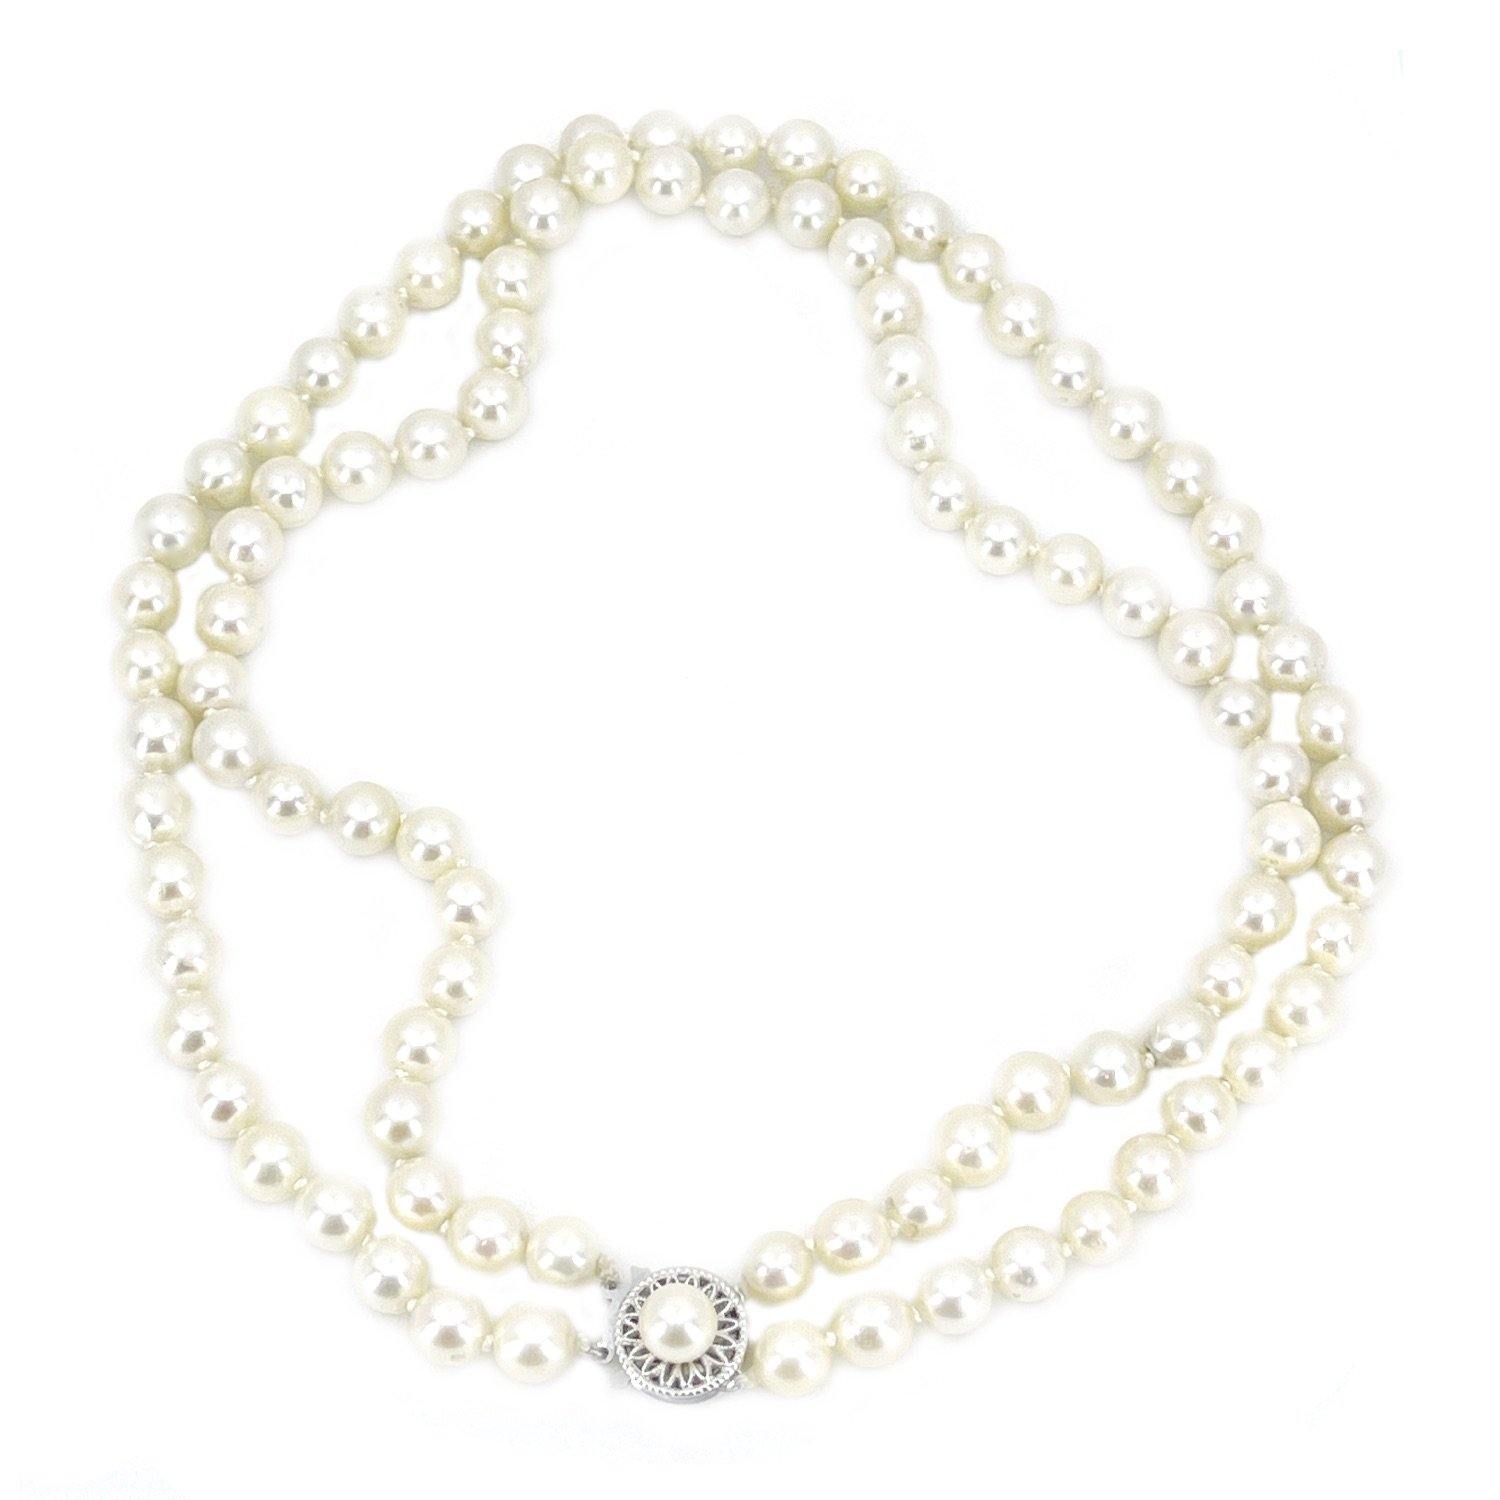 Double Strand Necklace Filigree Pearl Clasp